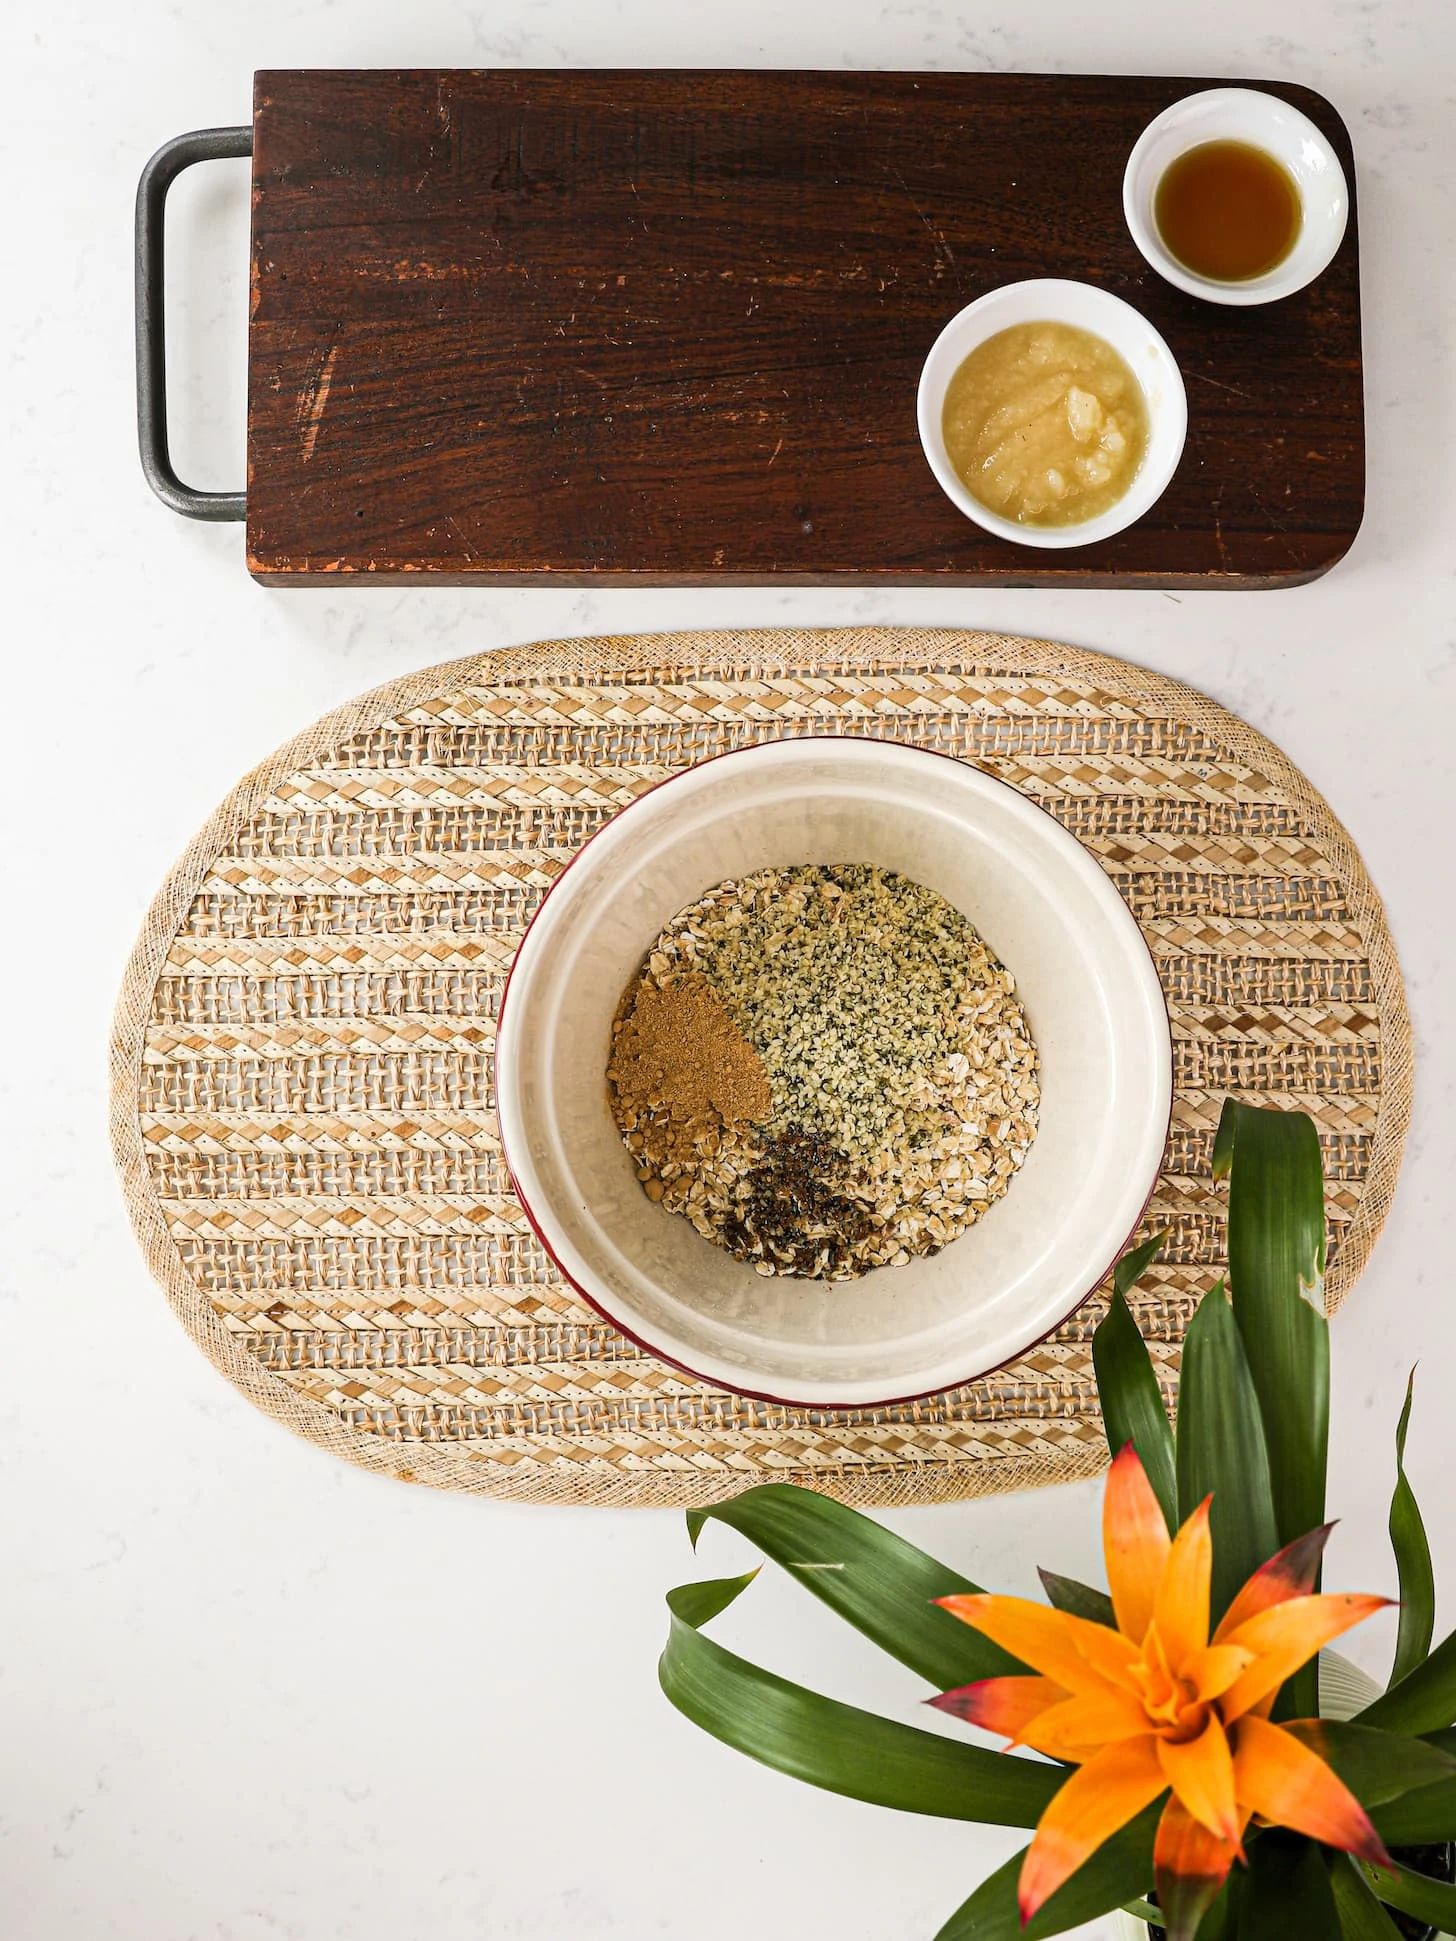 bowl of rolled oats, hemp hearts and spices with a wooden board next to it that has apple sauce and maple syrup. There is a plant in the corner.